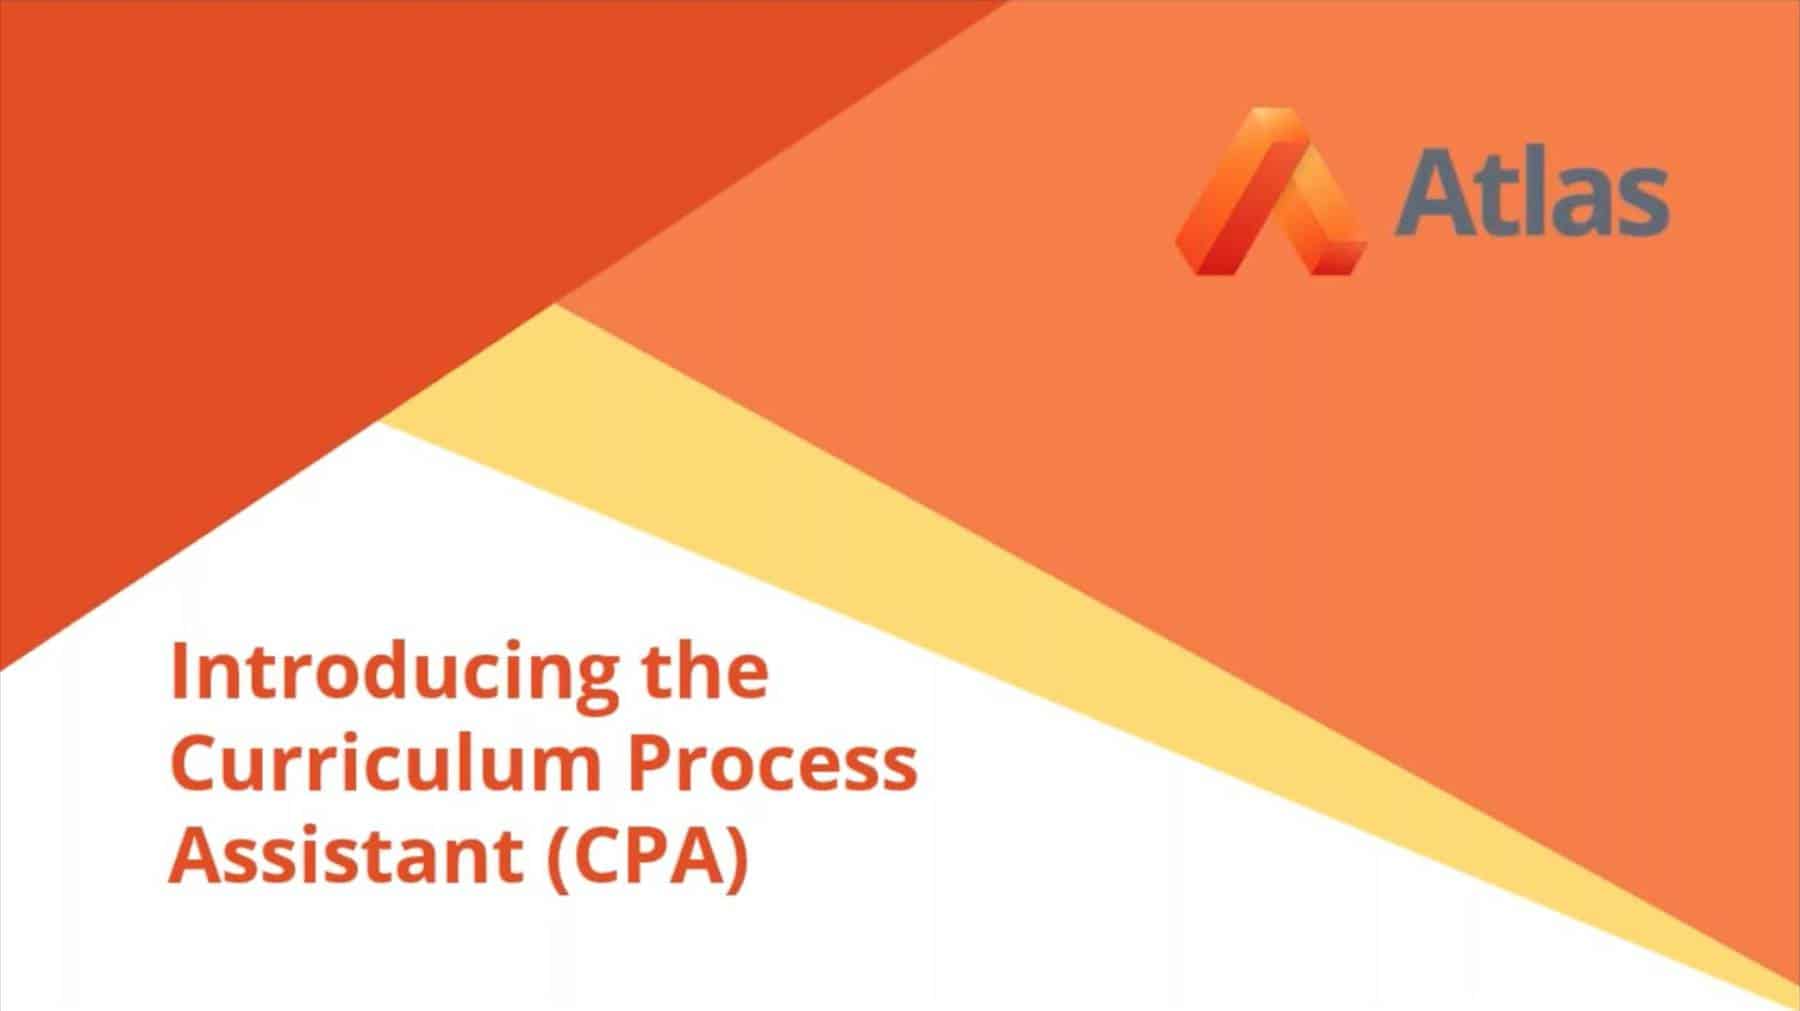 Introducing the Curriculum Process Assistant (CPA)